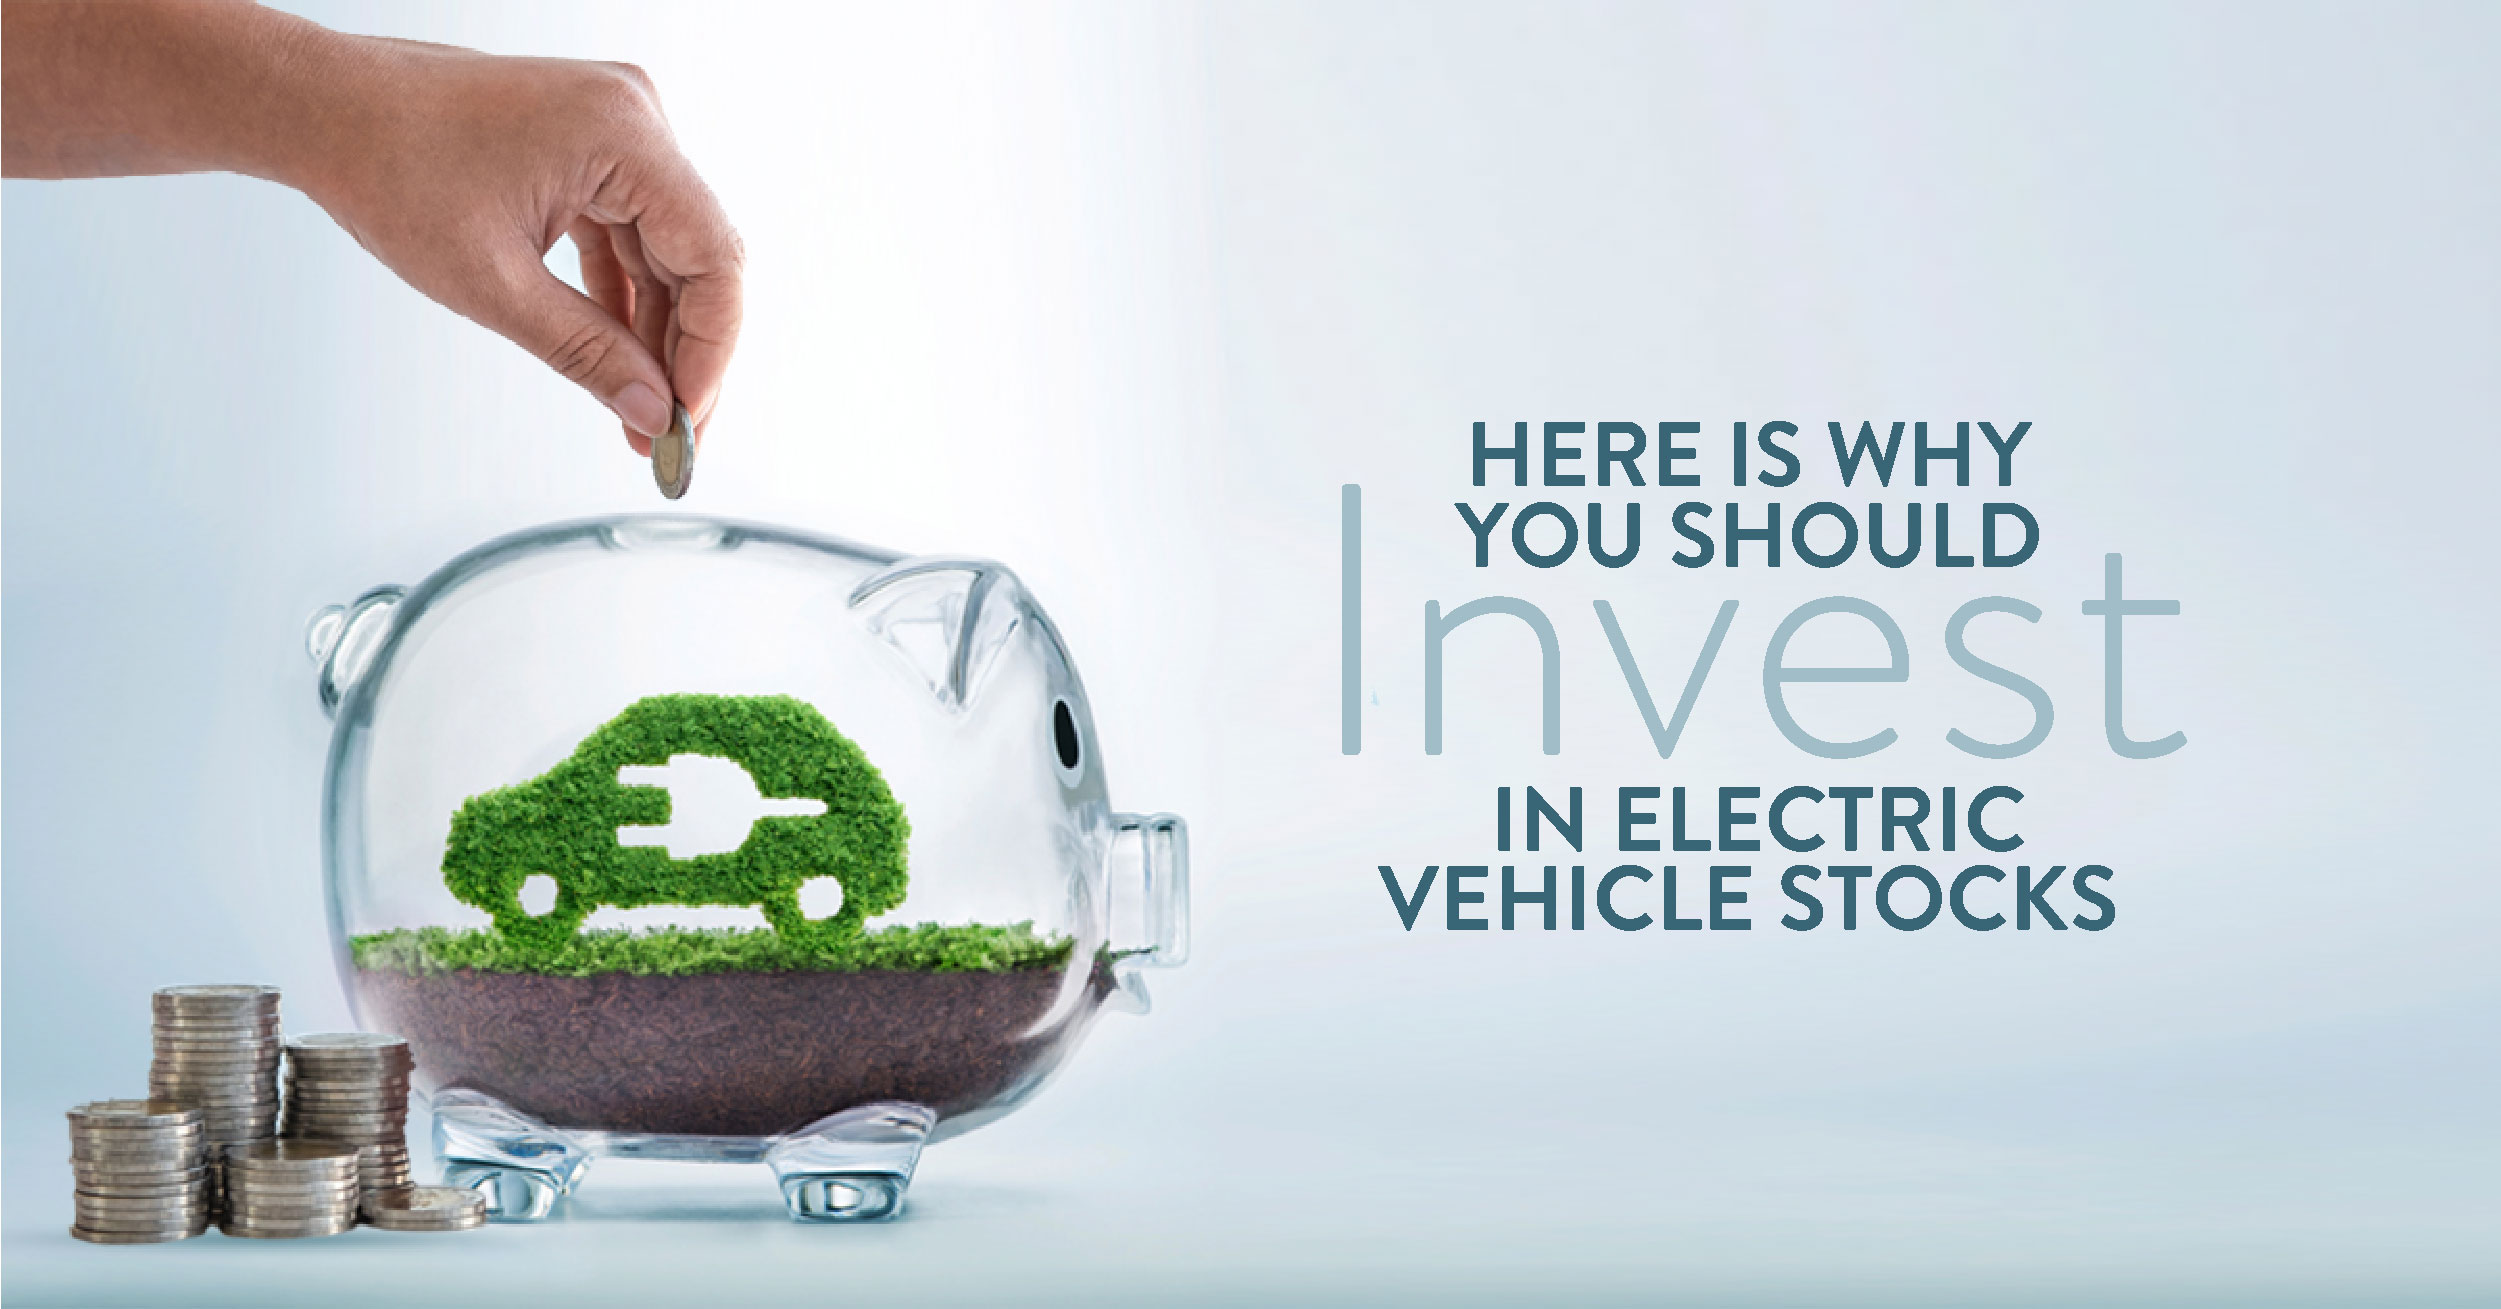 Here is Why You Should Invest in Electric Vehicle Stocks